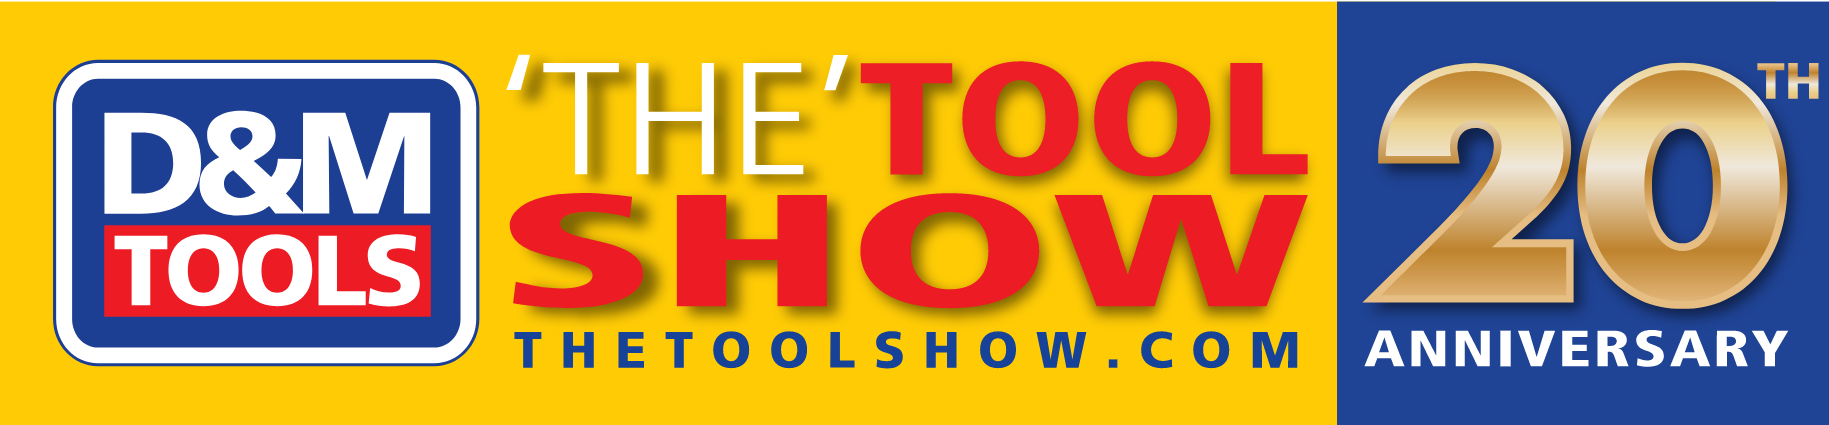 'The' Tool Show 2022 from D&M Tools - 20th Anniversary Show